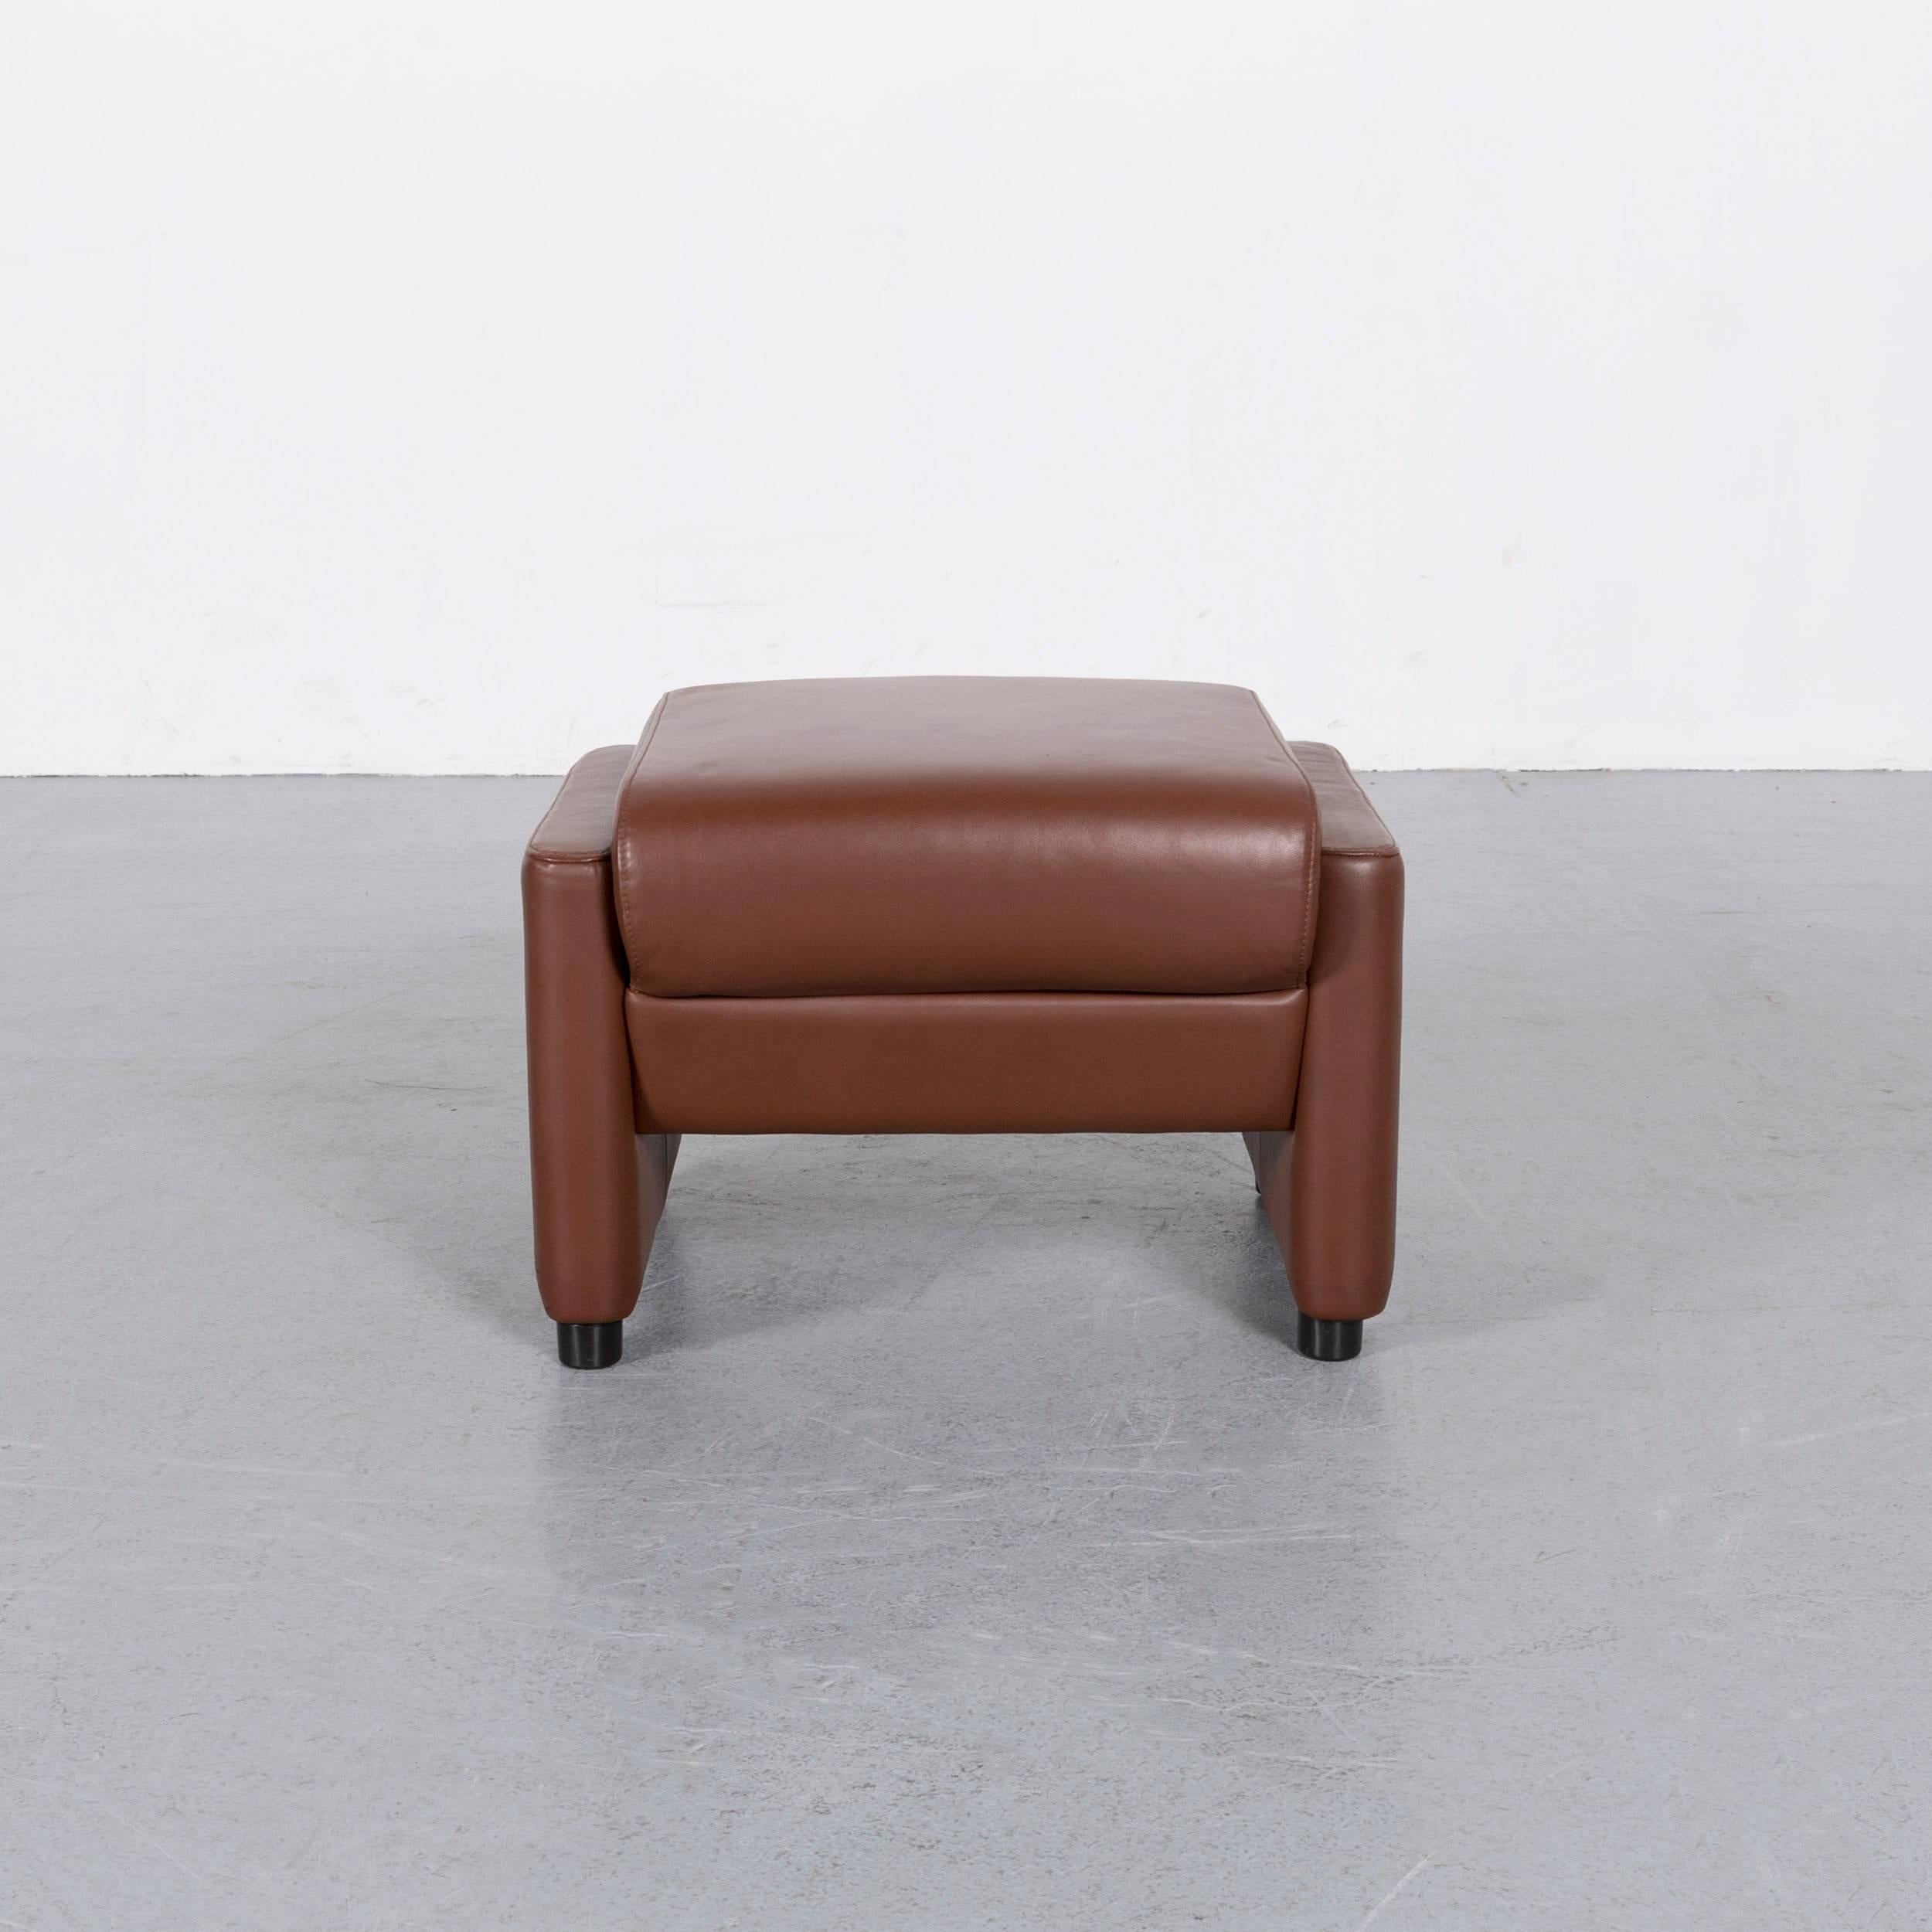 Erpo designer footstool leather brown, in a minimalistic and modern design, made for pure comfort.